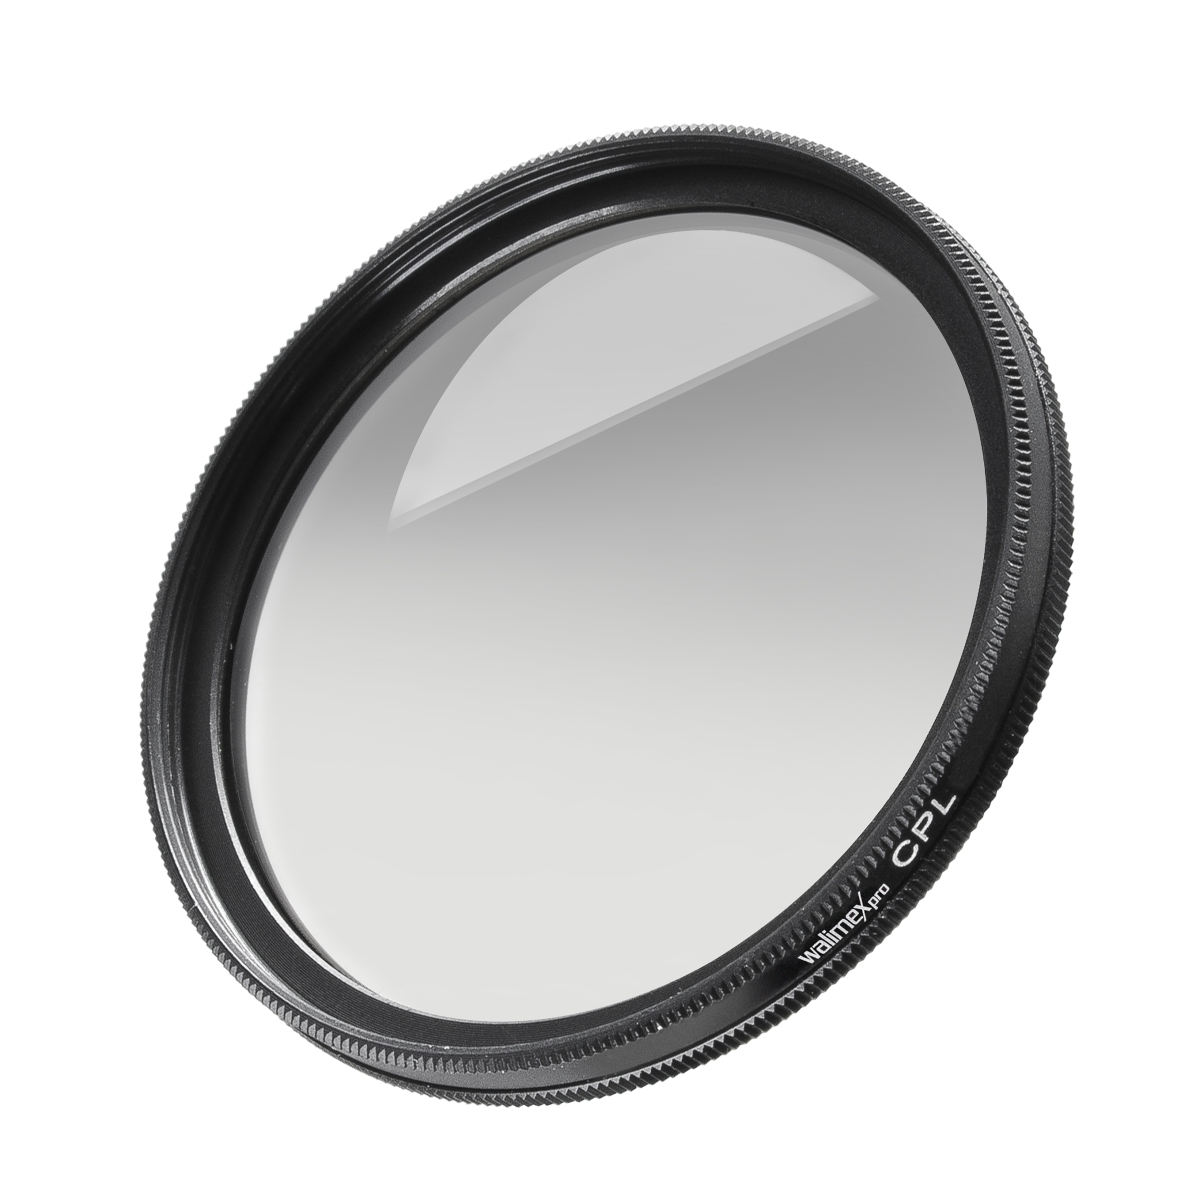 Walimex pro MC CPL filter coated 62 mm